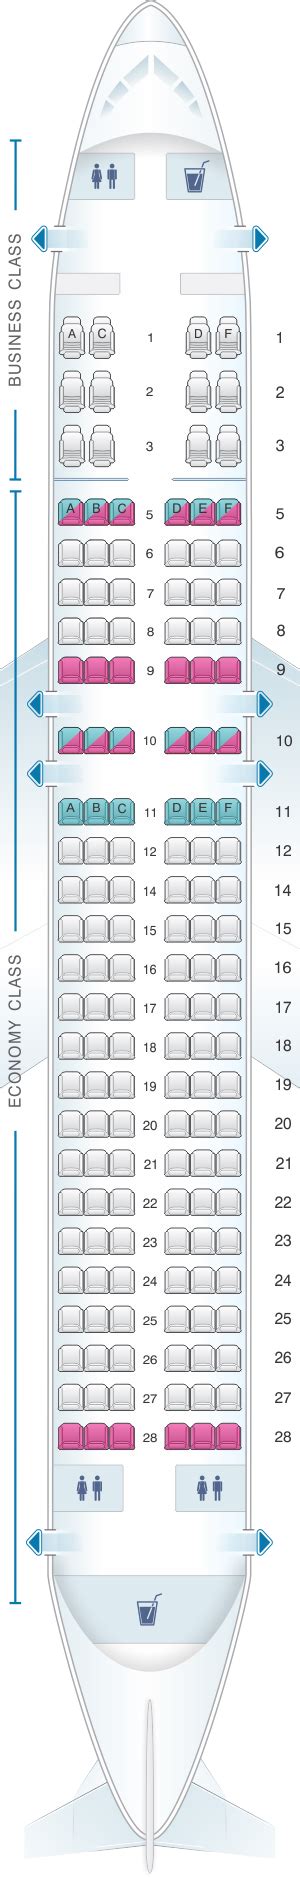 American Airbus A320 Seat Map